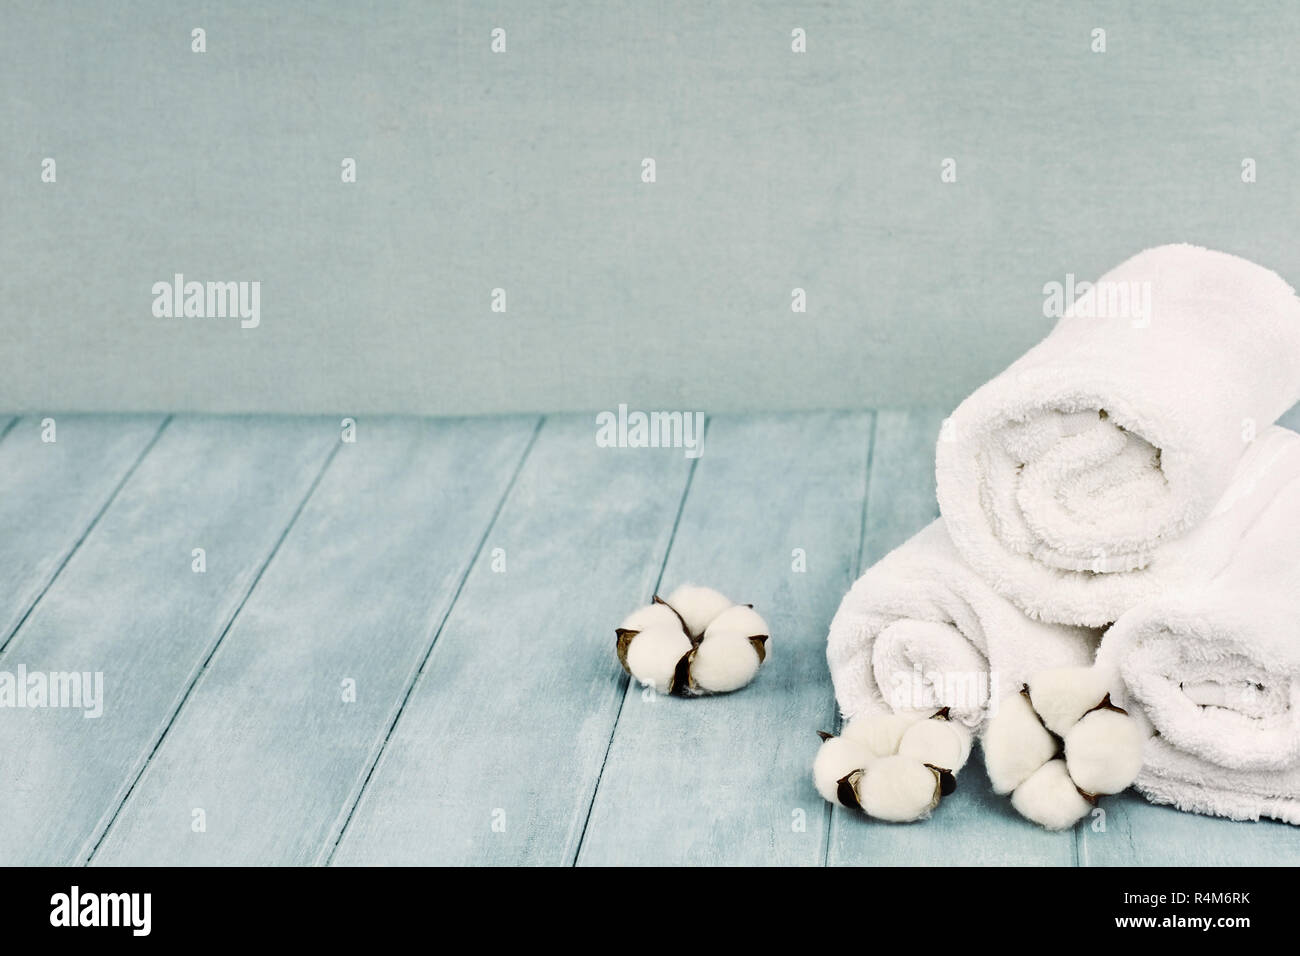 Rolled up white fluffy towels with cotton flowers against a blurred blue  background with free space for text Stock Photo - Alamy